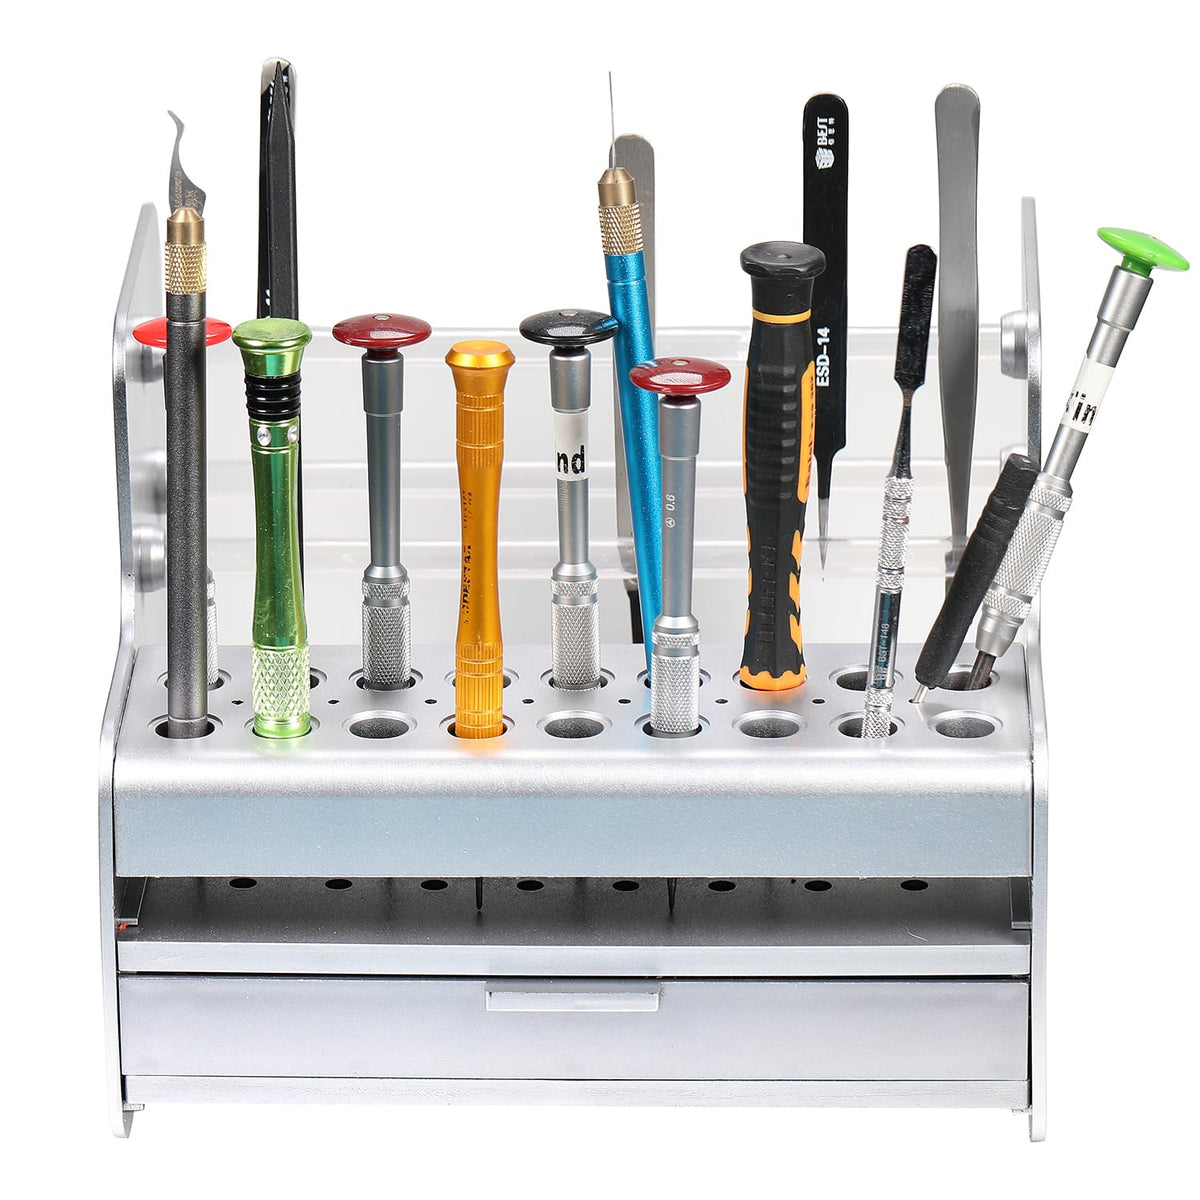 THE PP MULTI-FUNCTION SCREWDRIVER STORAGE BOX